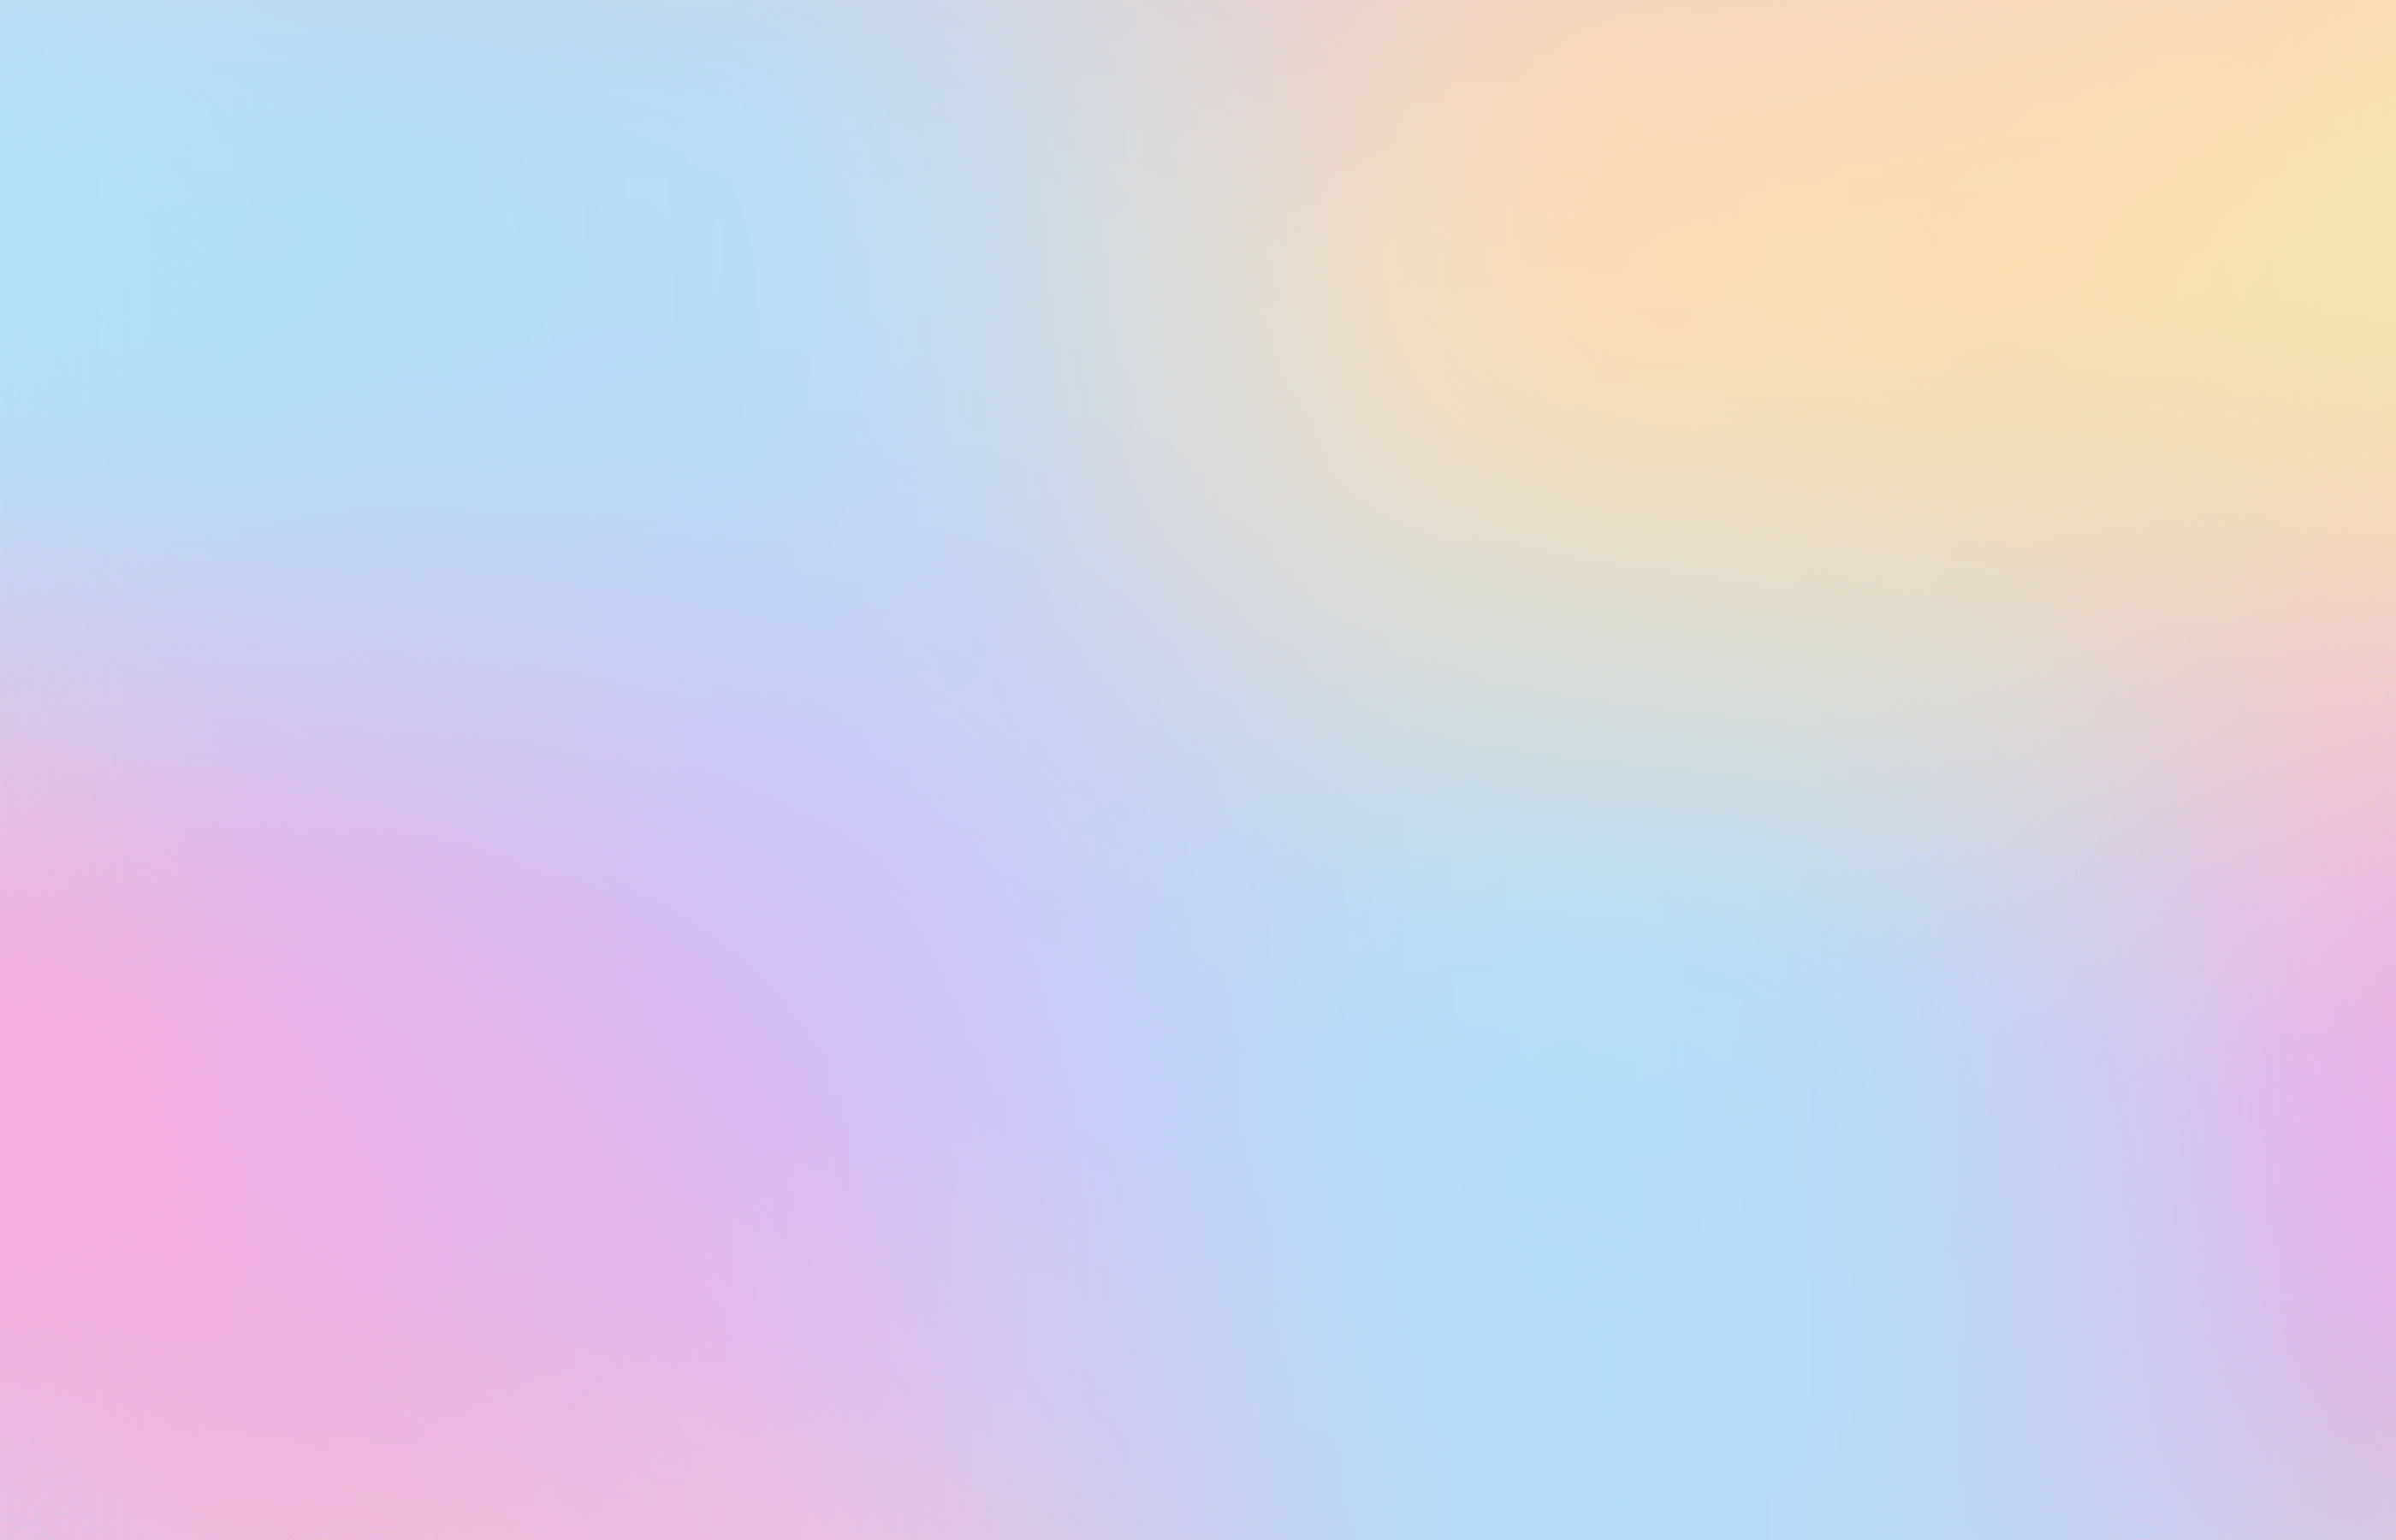 A colorful background with pink, blue and yellow - Gradient, paper